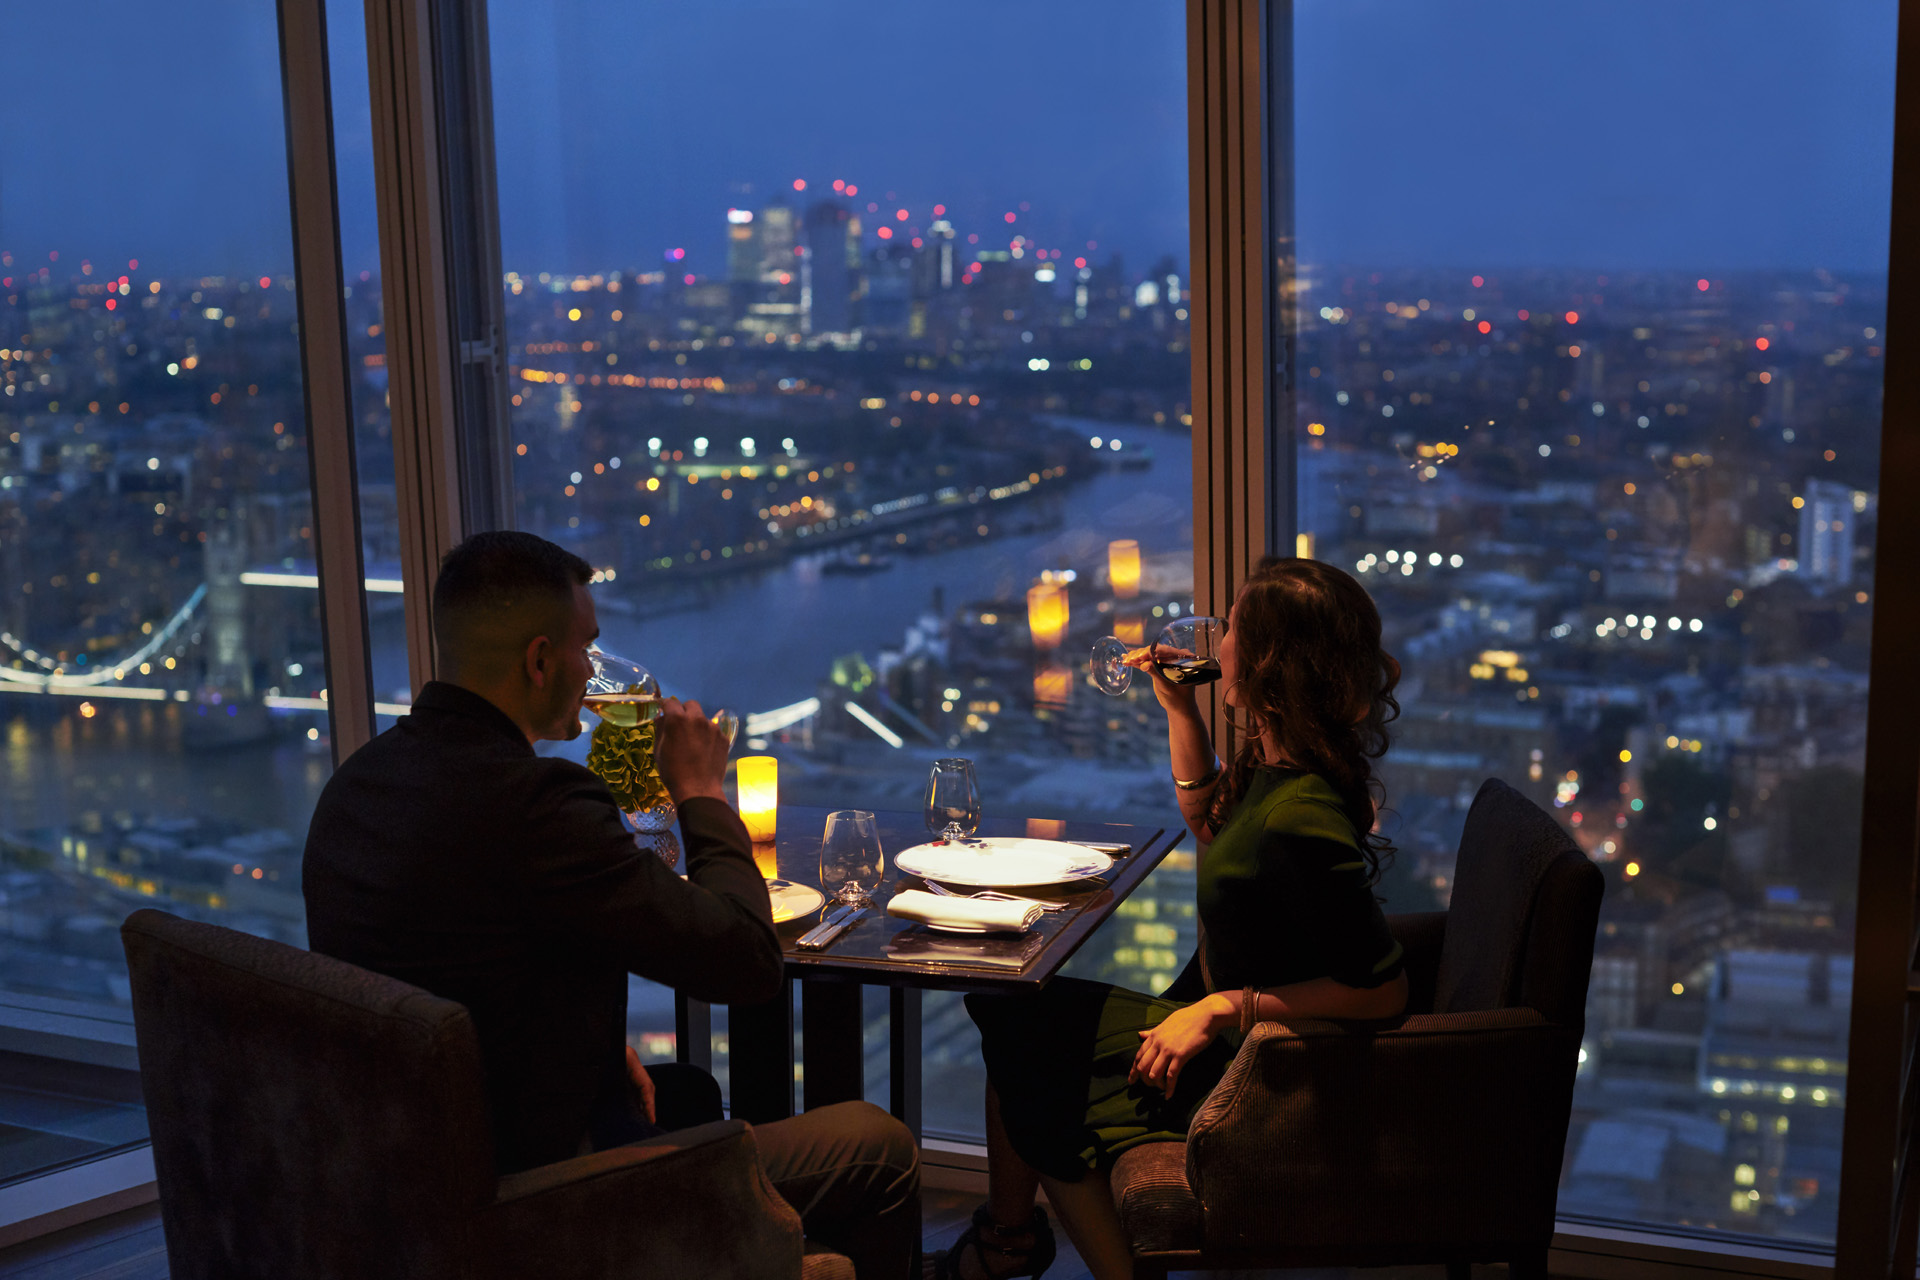 Shangri-La Hotel, At The Shard, London, TING Restaurant, Table With People